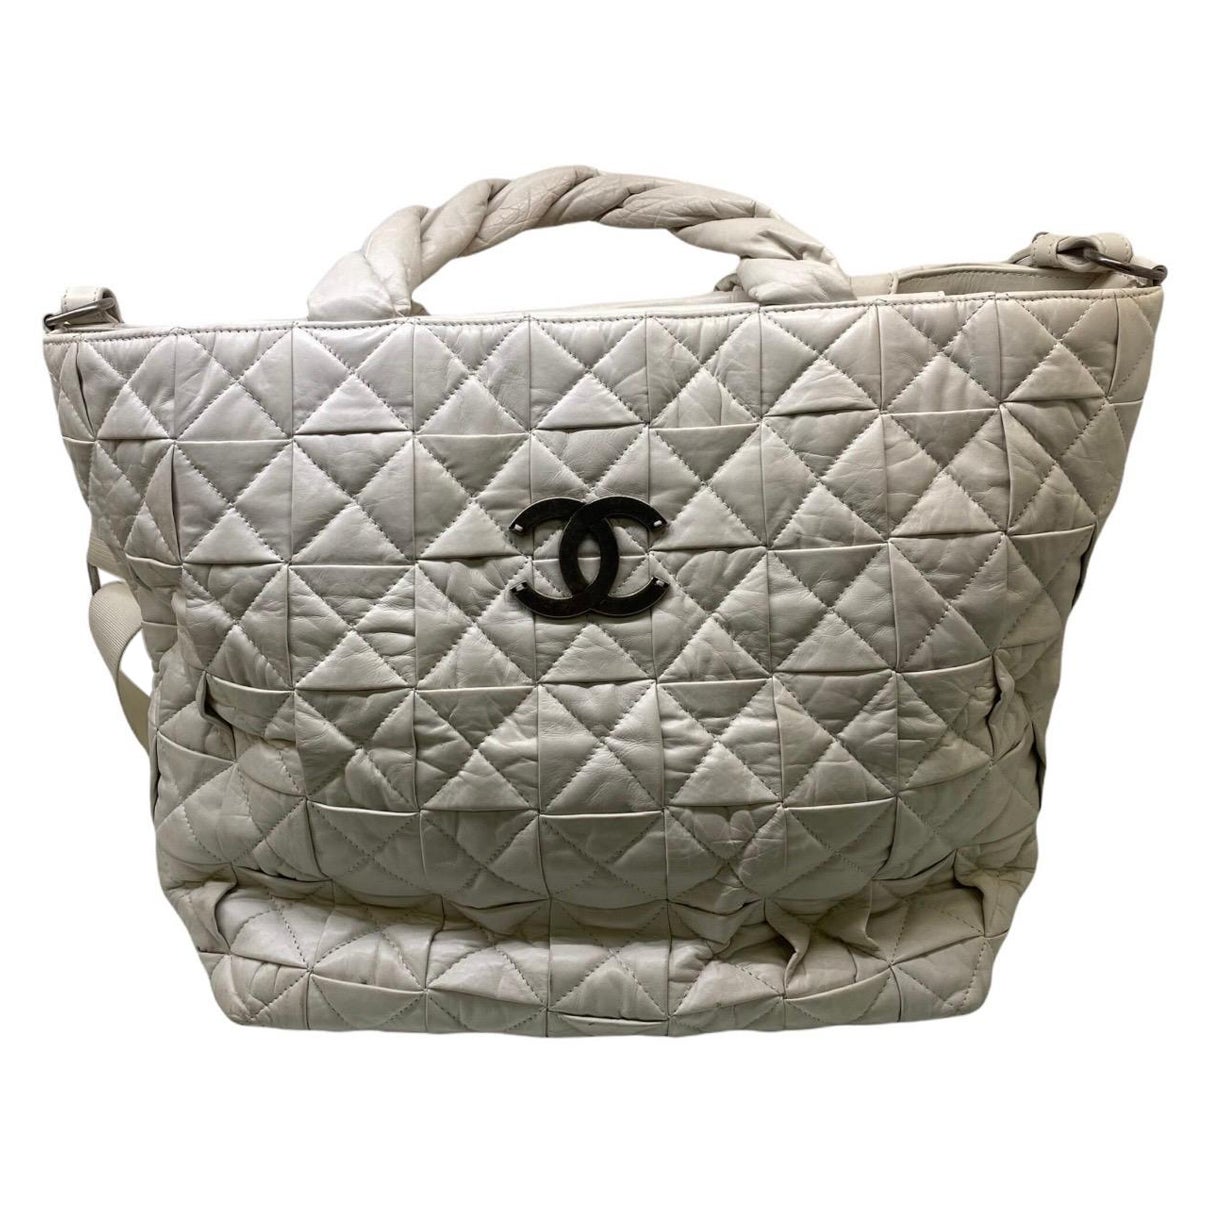 Chanel White Leather Bag